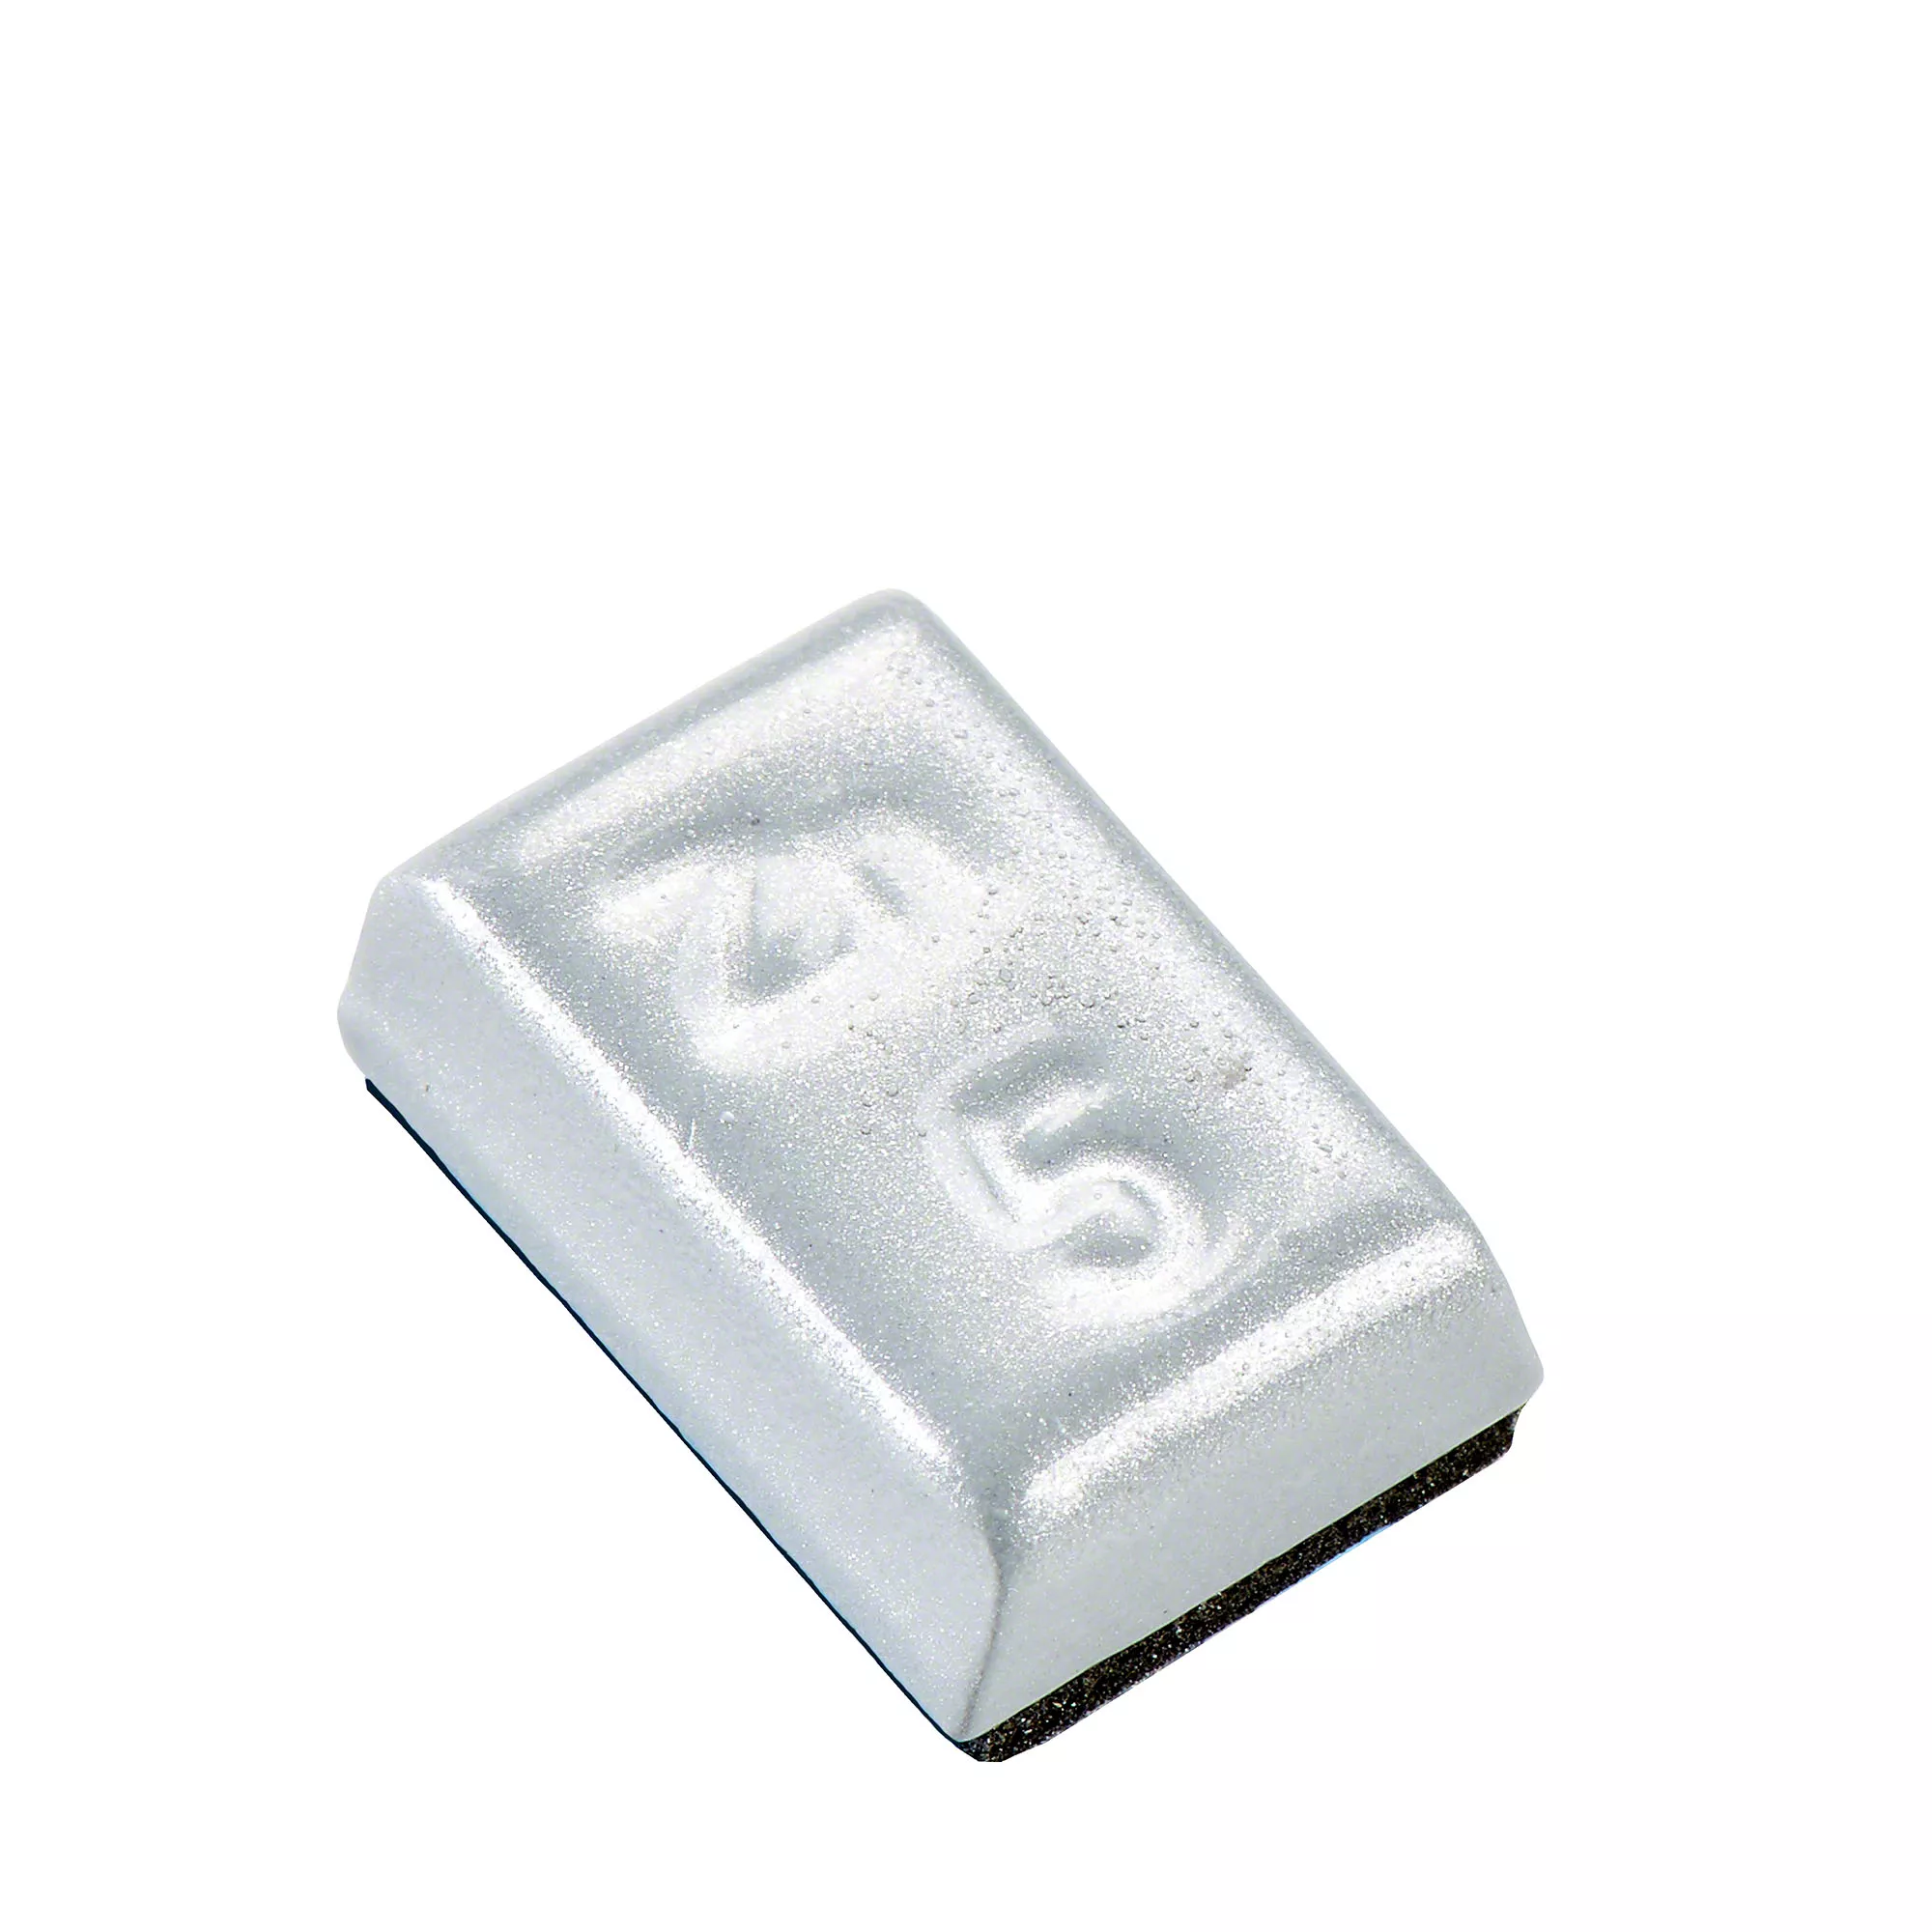 adhesive weight - Typ 799, 5 g, zinc, silver